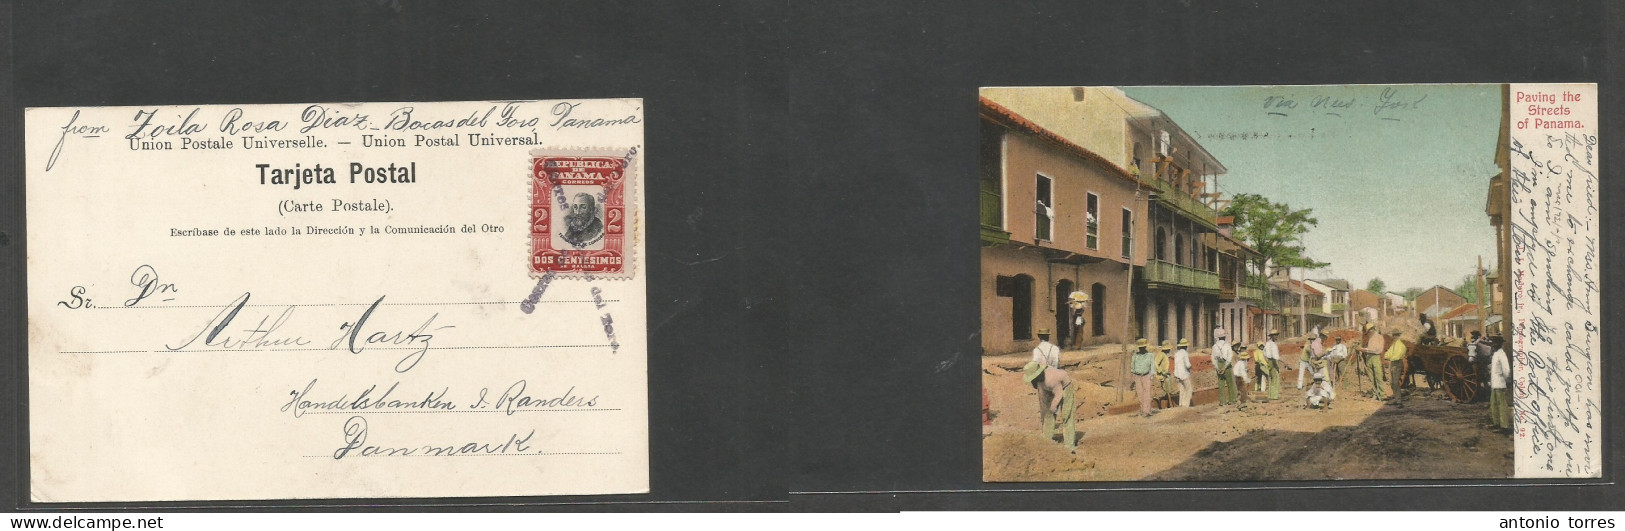 Panama. C. 1909. Bocas Del Toro - Denmark, Randesi. Early Color Photo Ppc (street Pavements) Fkd 2c Red, Tied Crossed To - Panamá